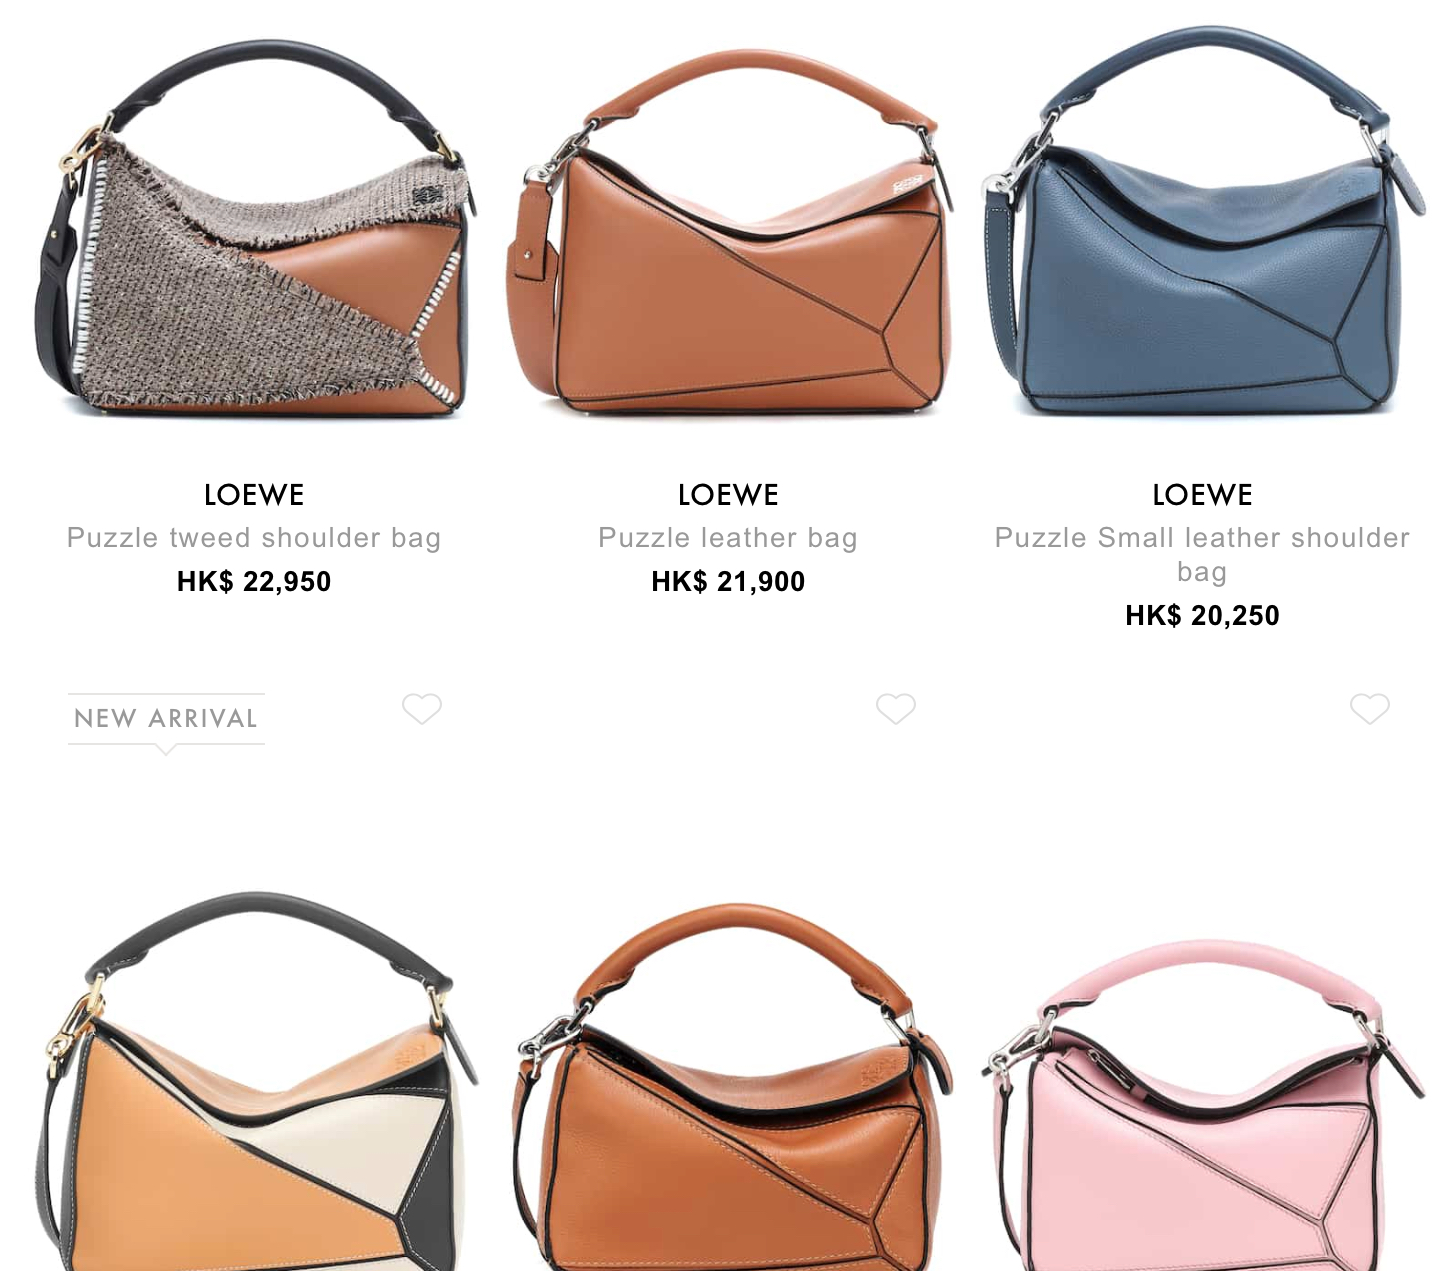 loewe puzzle small leather shoulder bag